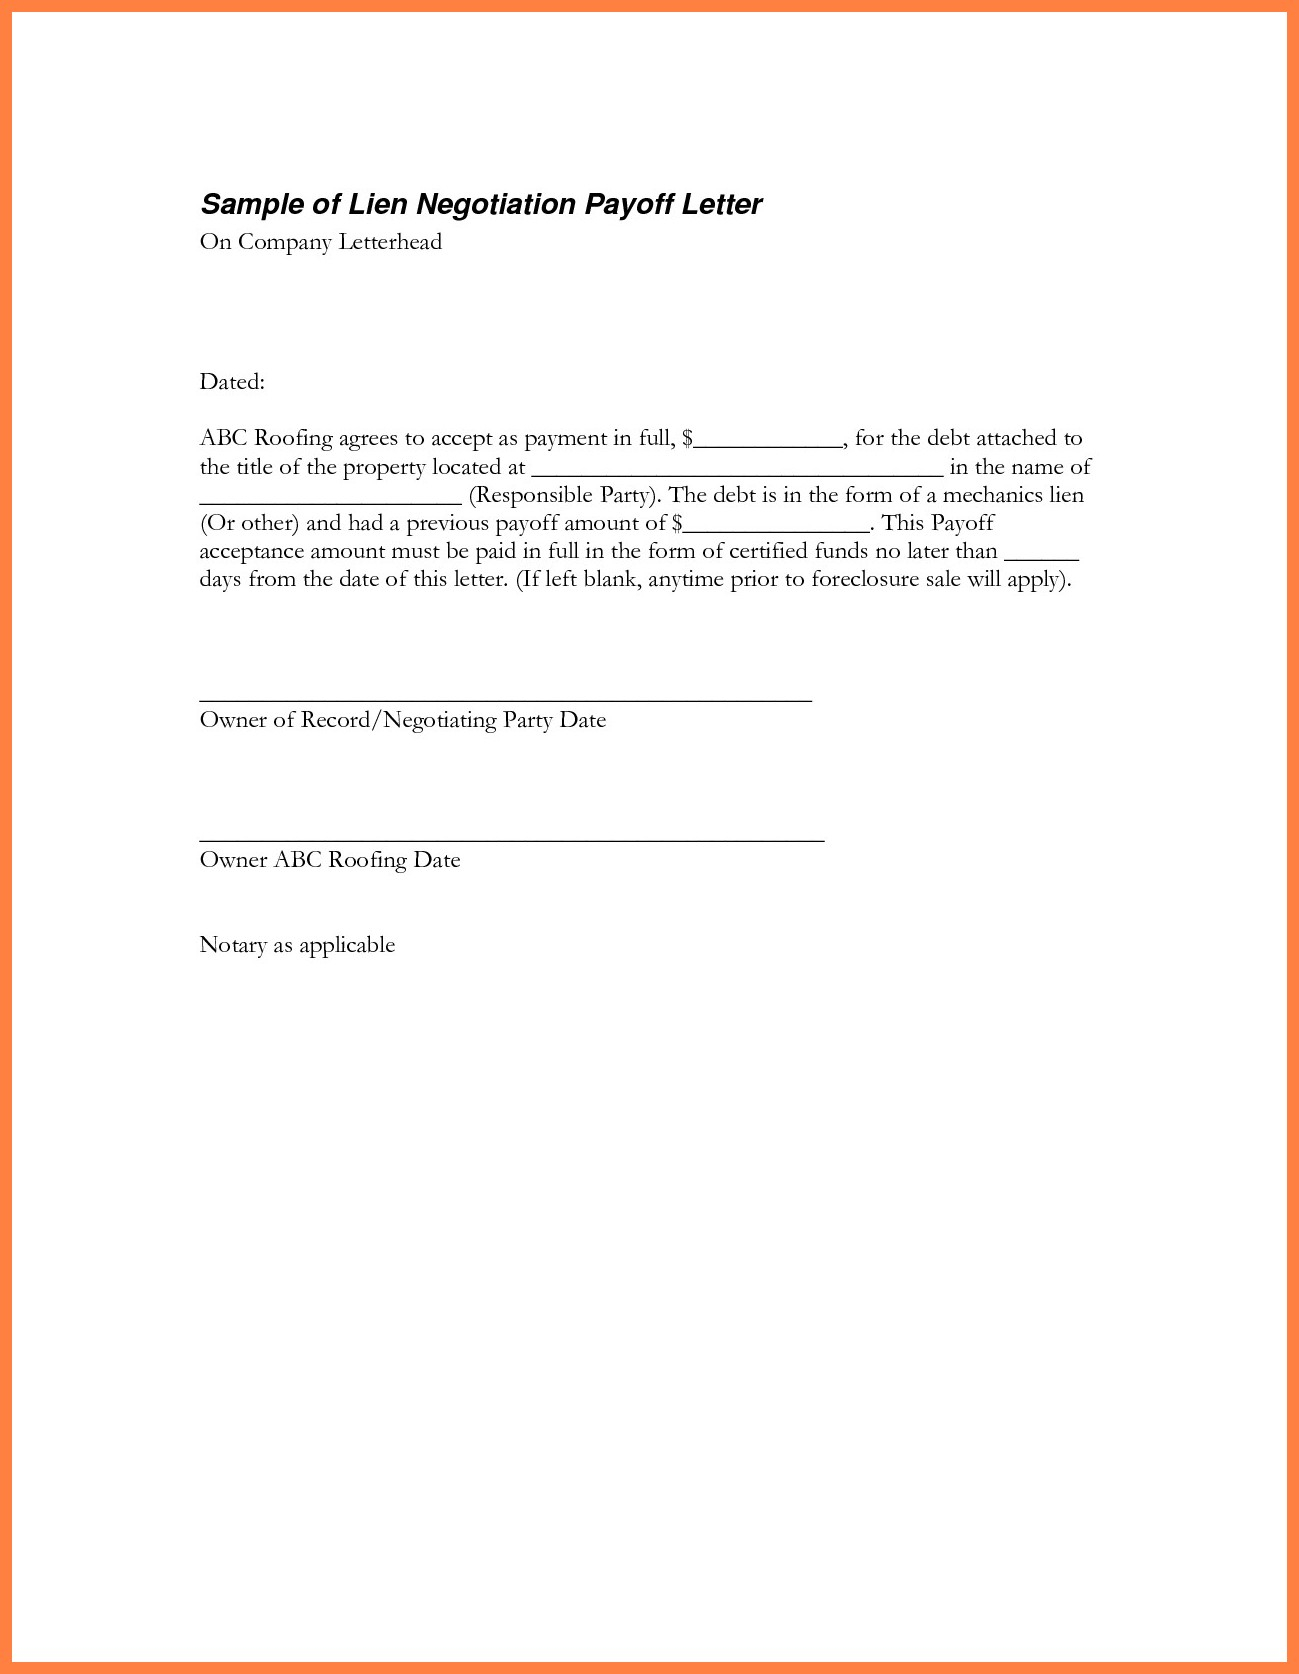 mortgage-loan-payoff-letter-template-samples-letter-template-collection